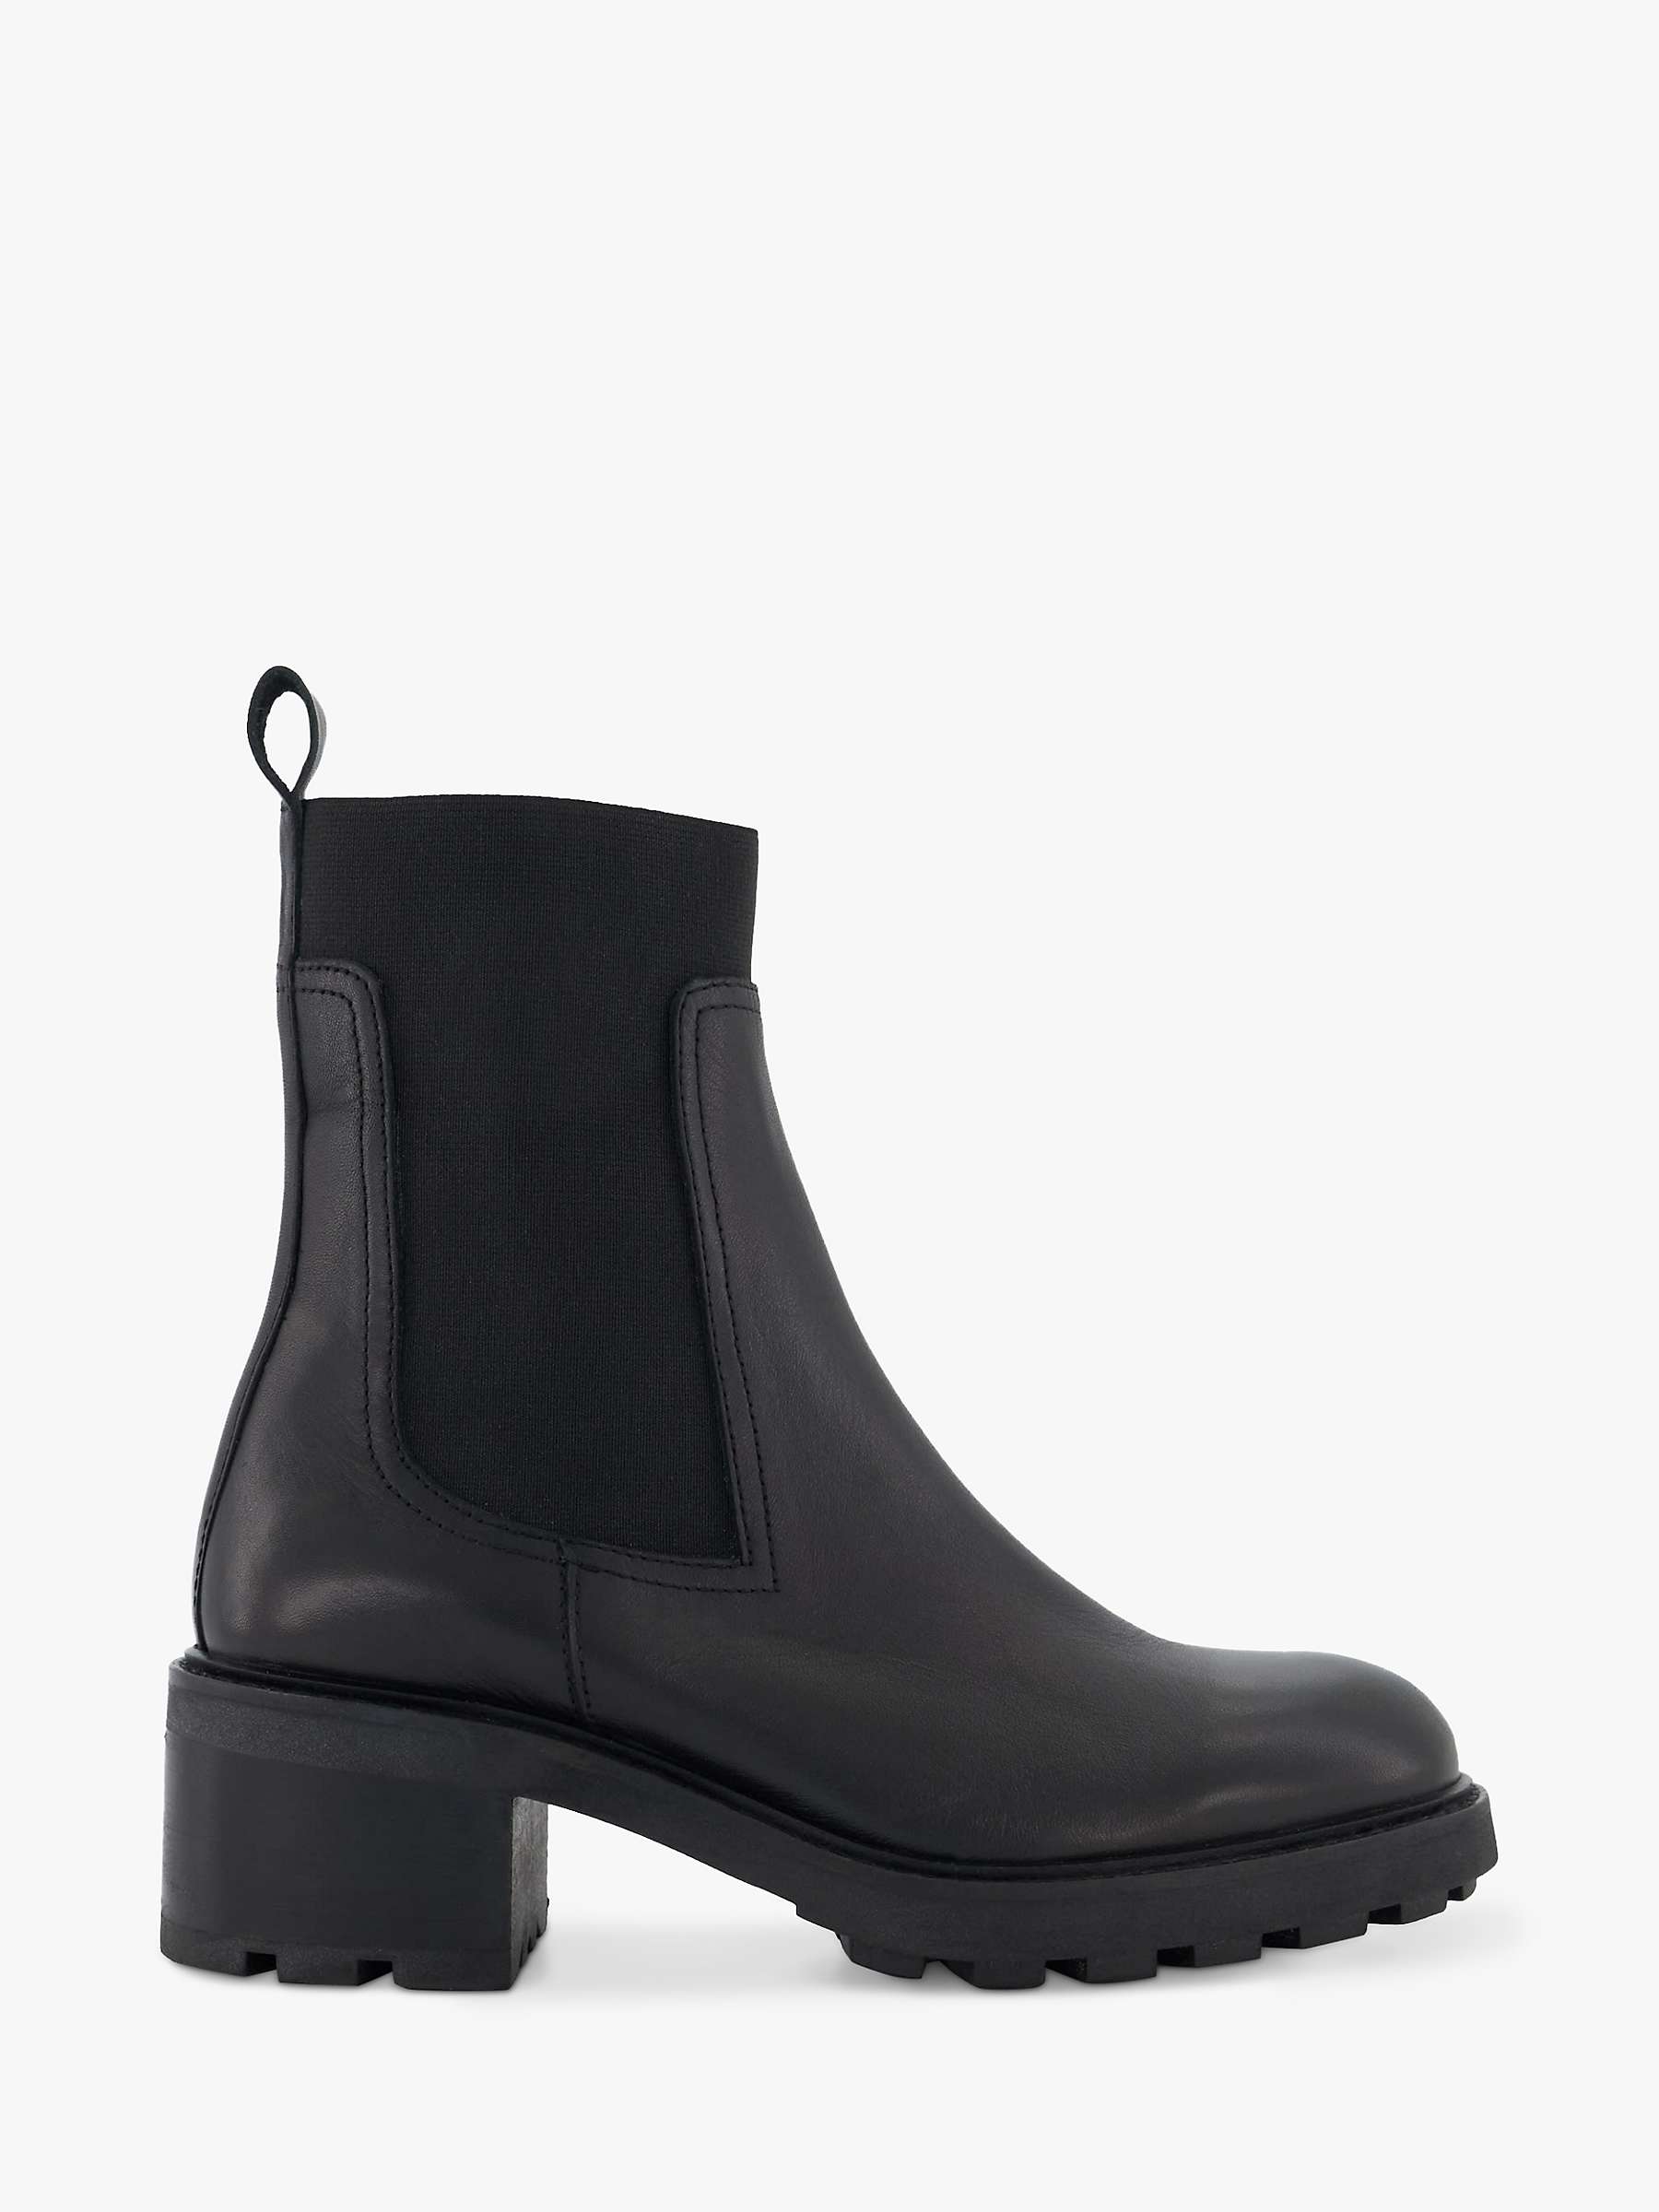 Buy Dune Perfect Leather Chelsea Boots, Black Online at johnlewis.com